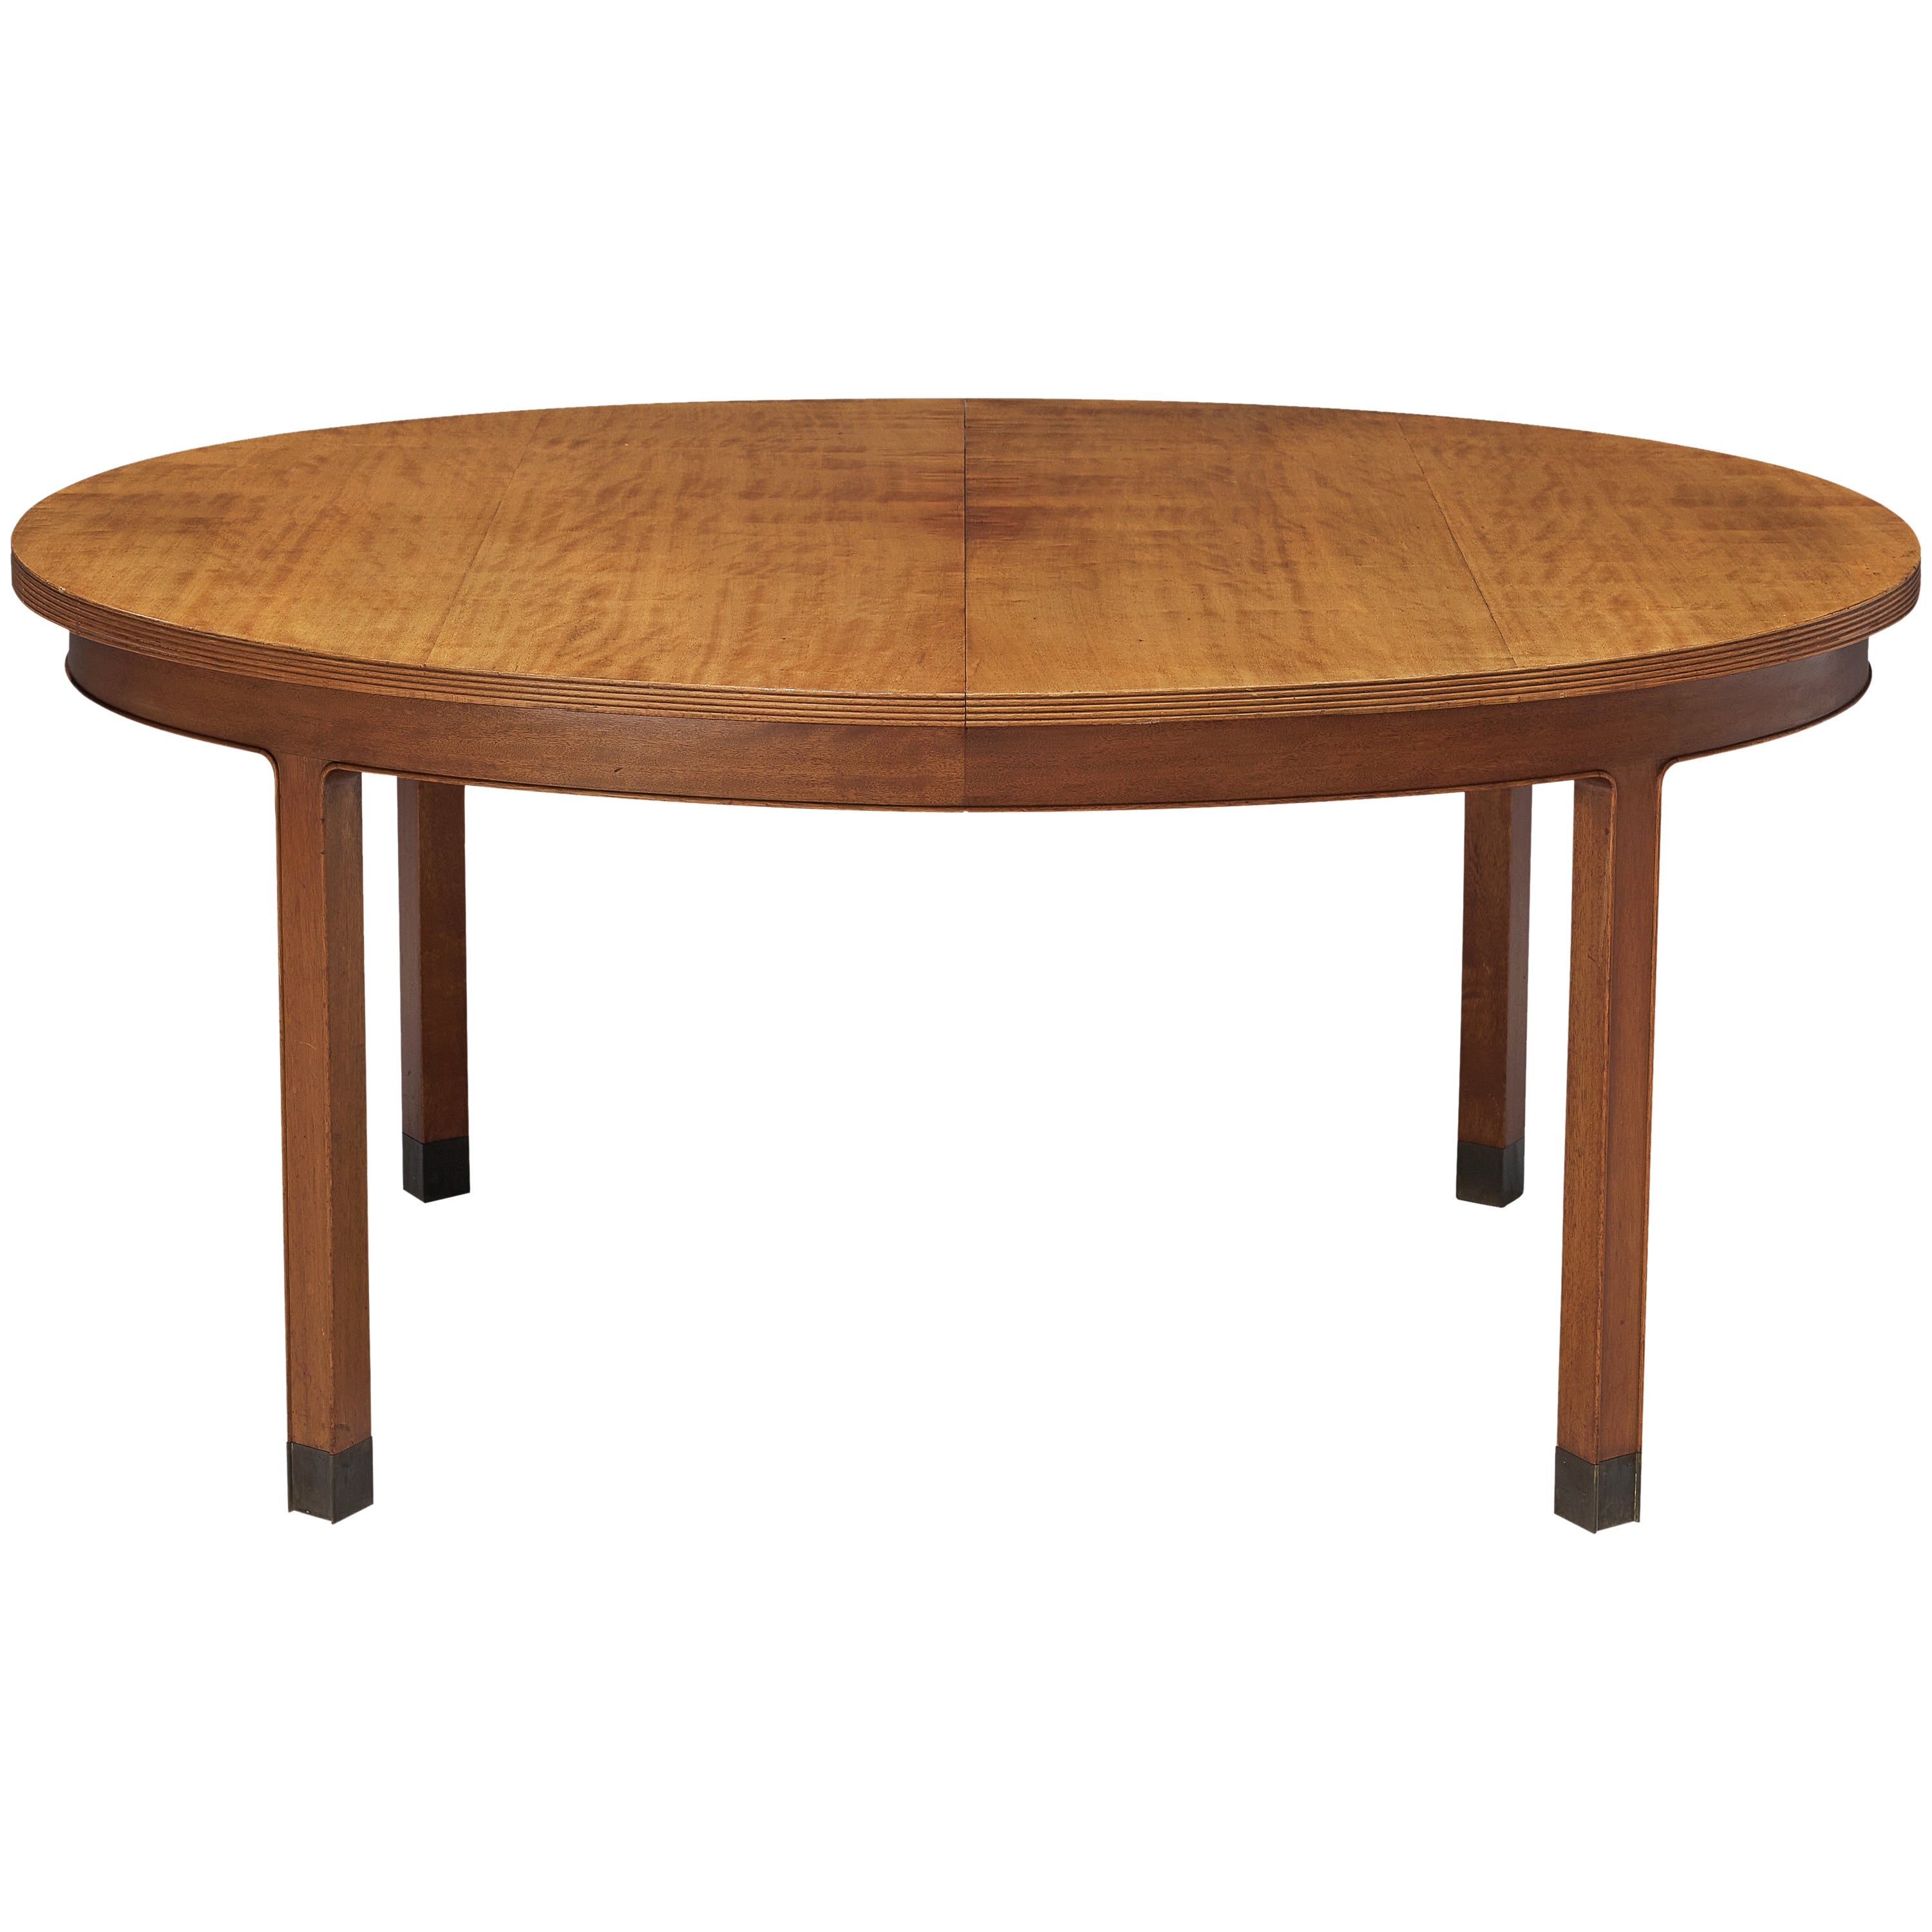 Danish Dining Table in Walnut and Mahogany with Brass Feet